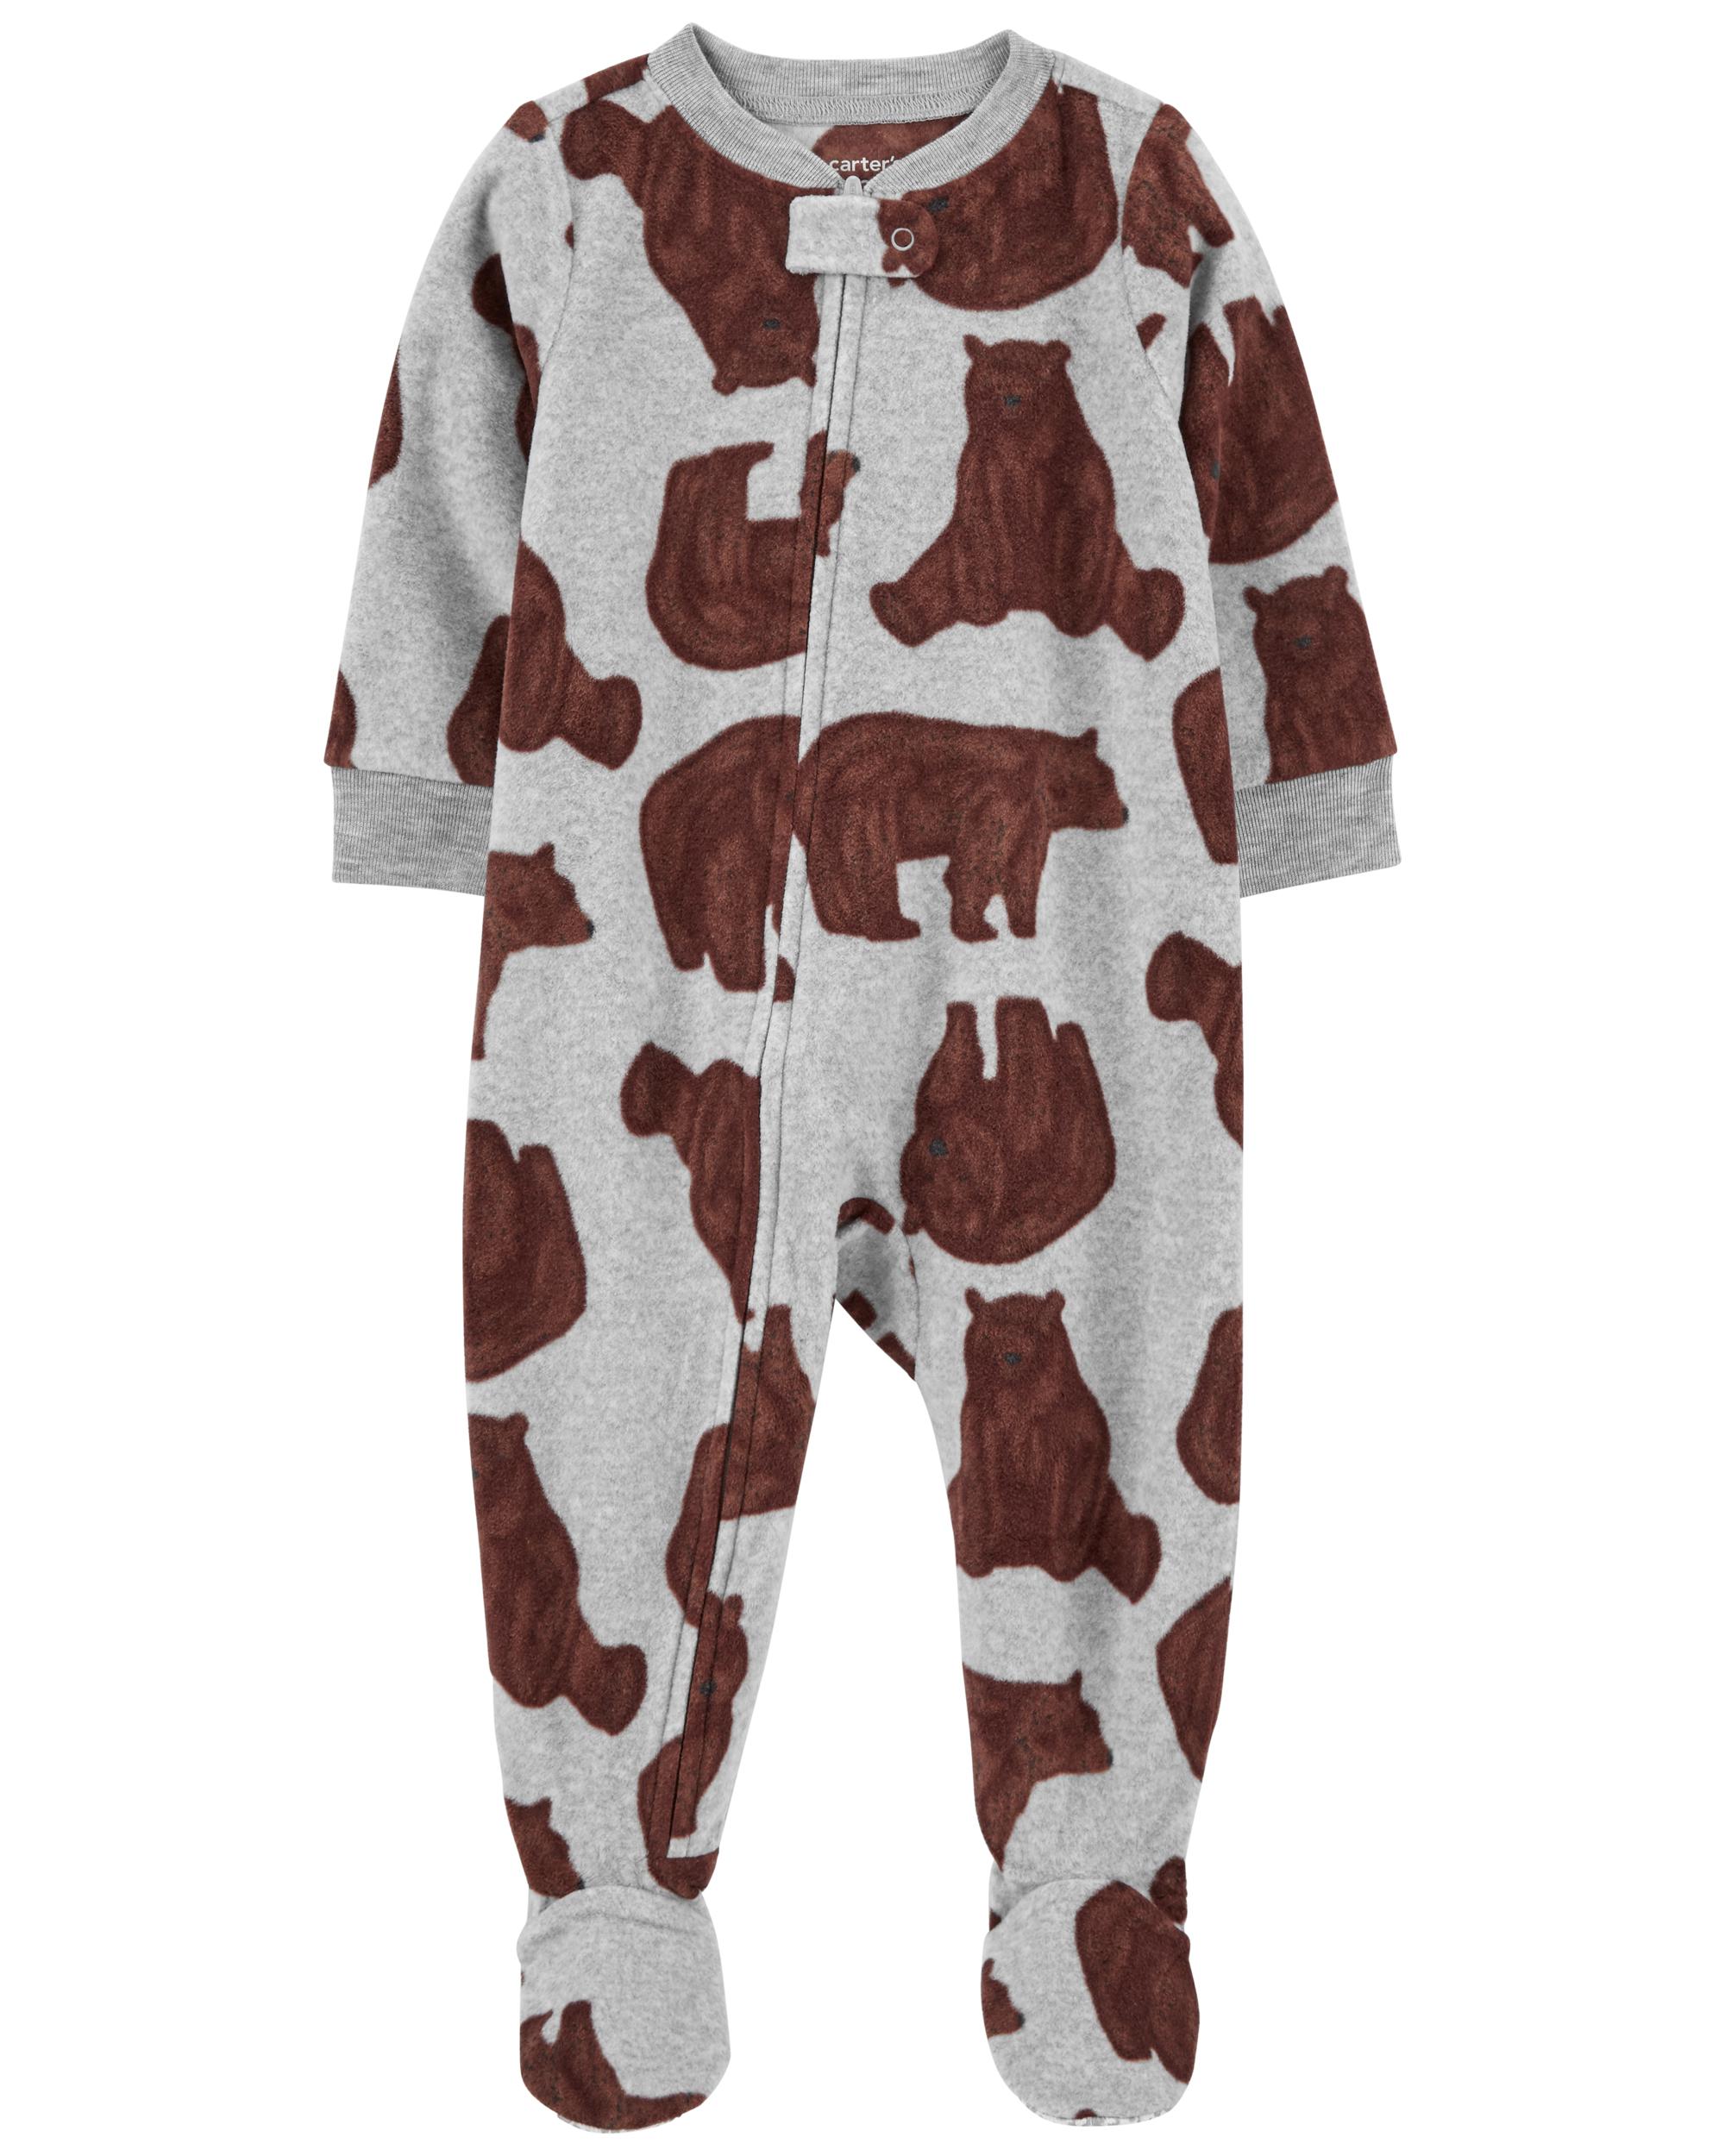  Little Boys & Girls Winter Fun Fleece Footed Pajamas Onesie  Sleeper for Toddlers… : Clothing, Shoes & Jewelry